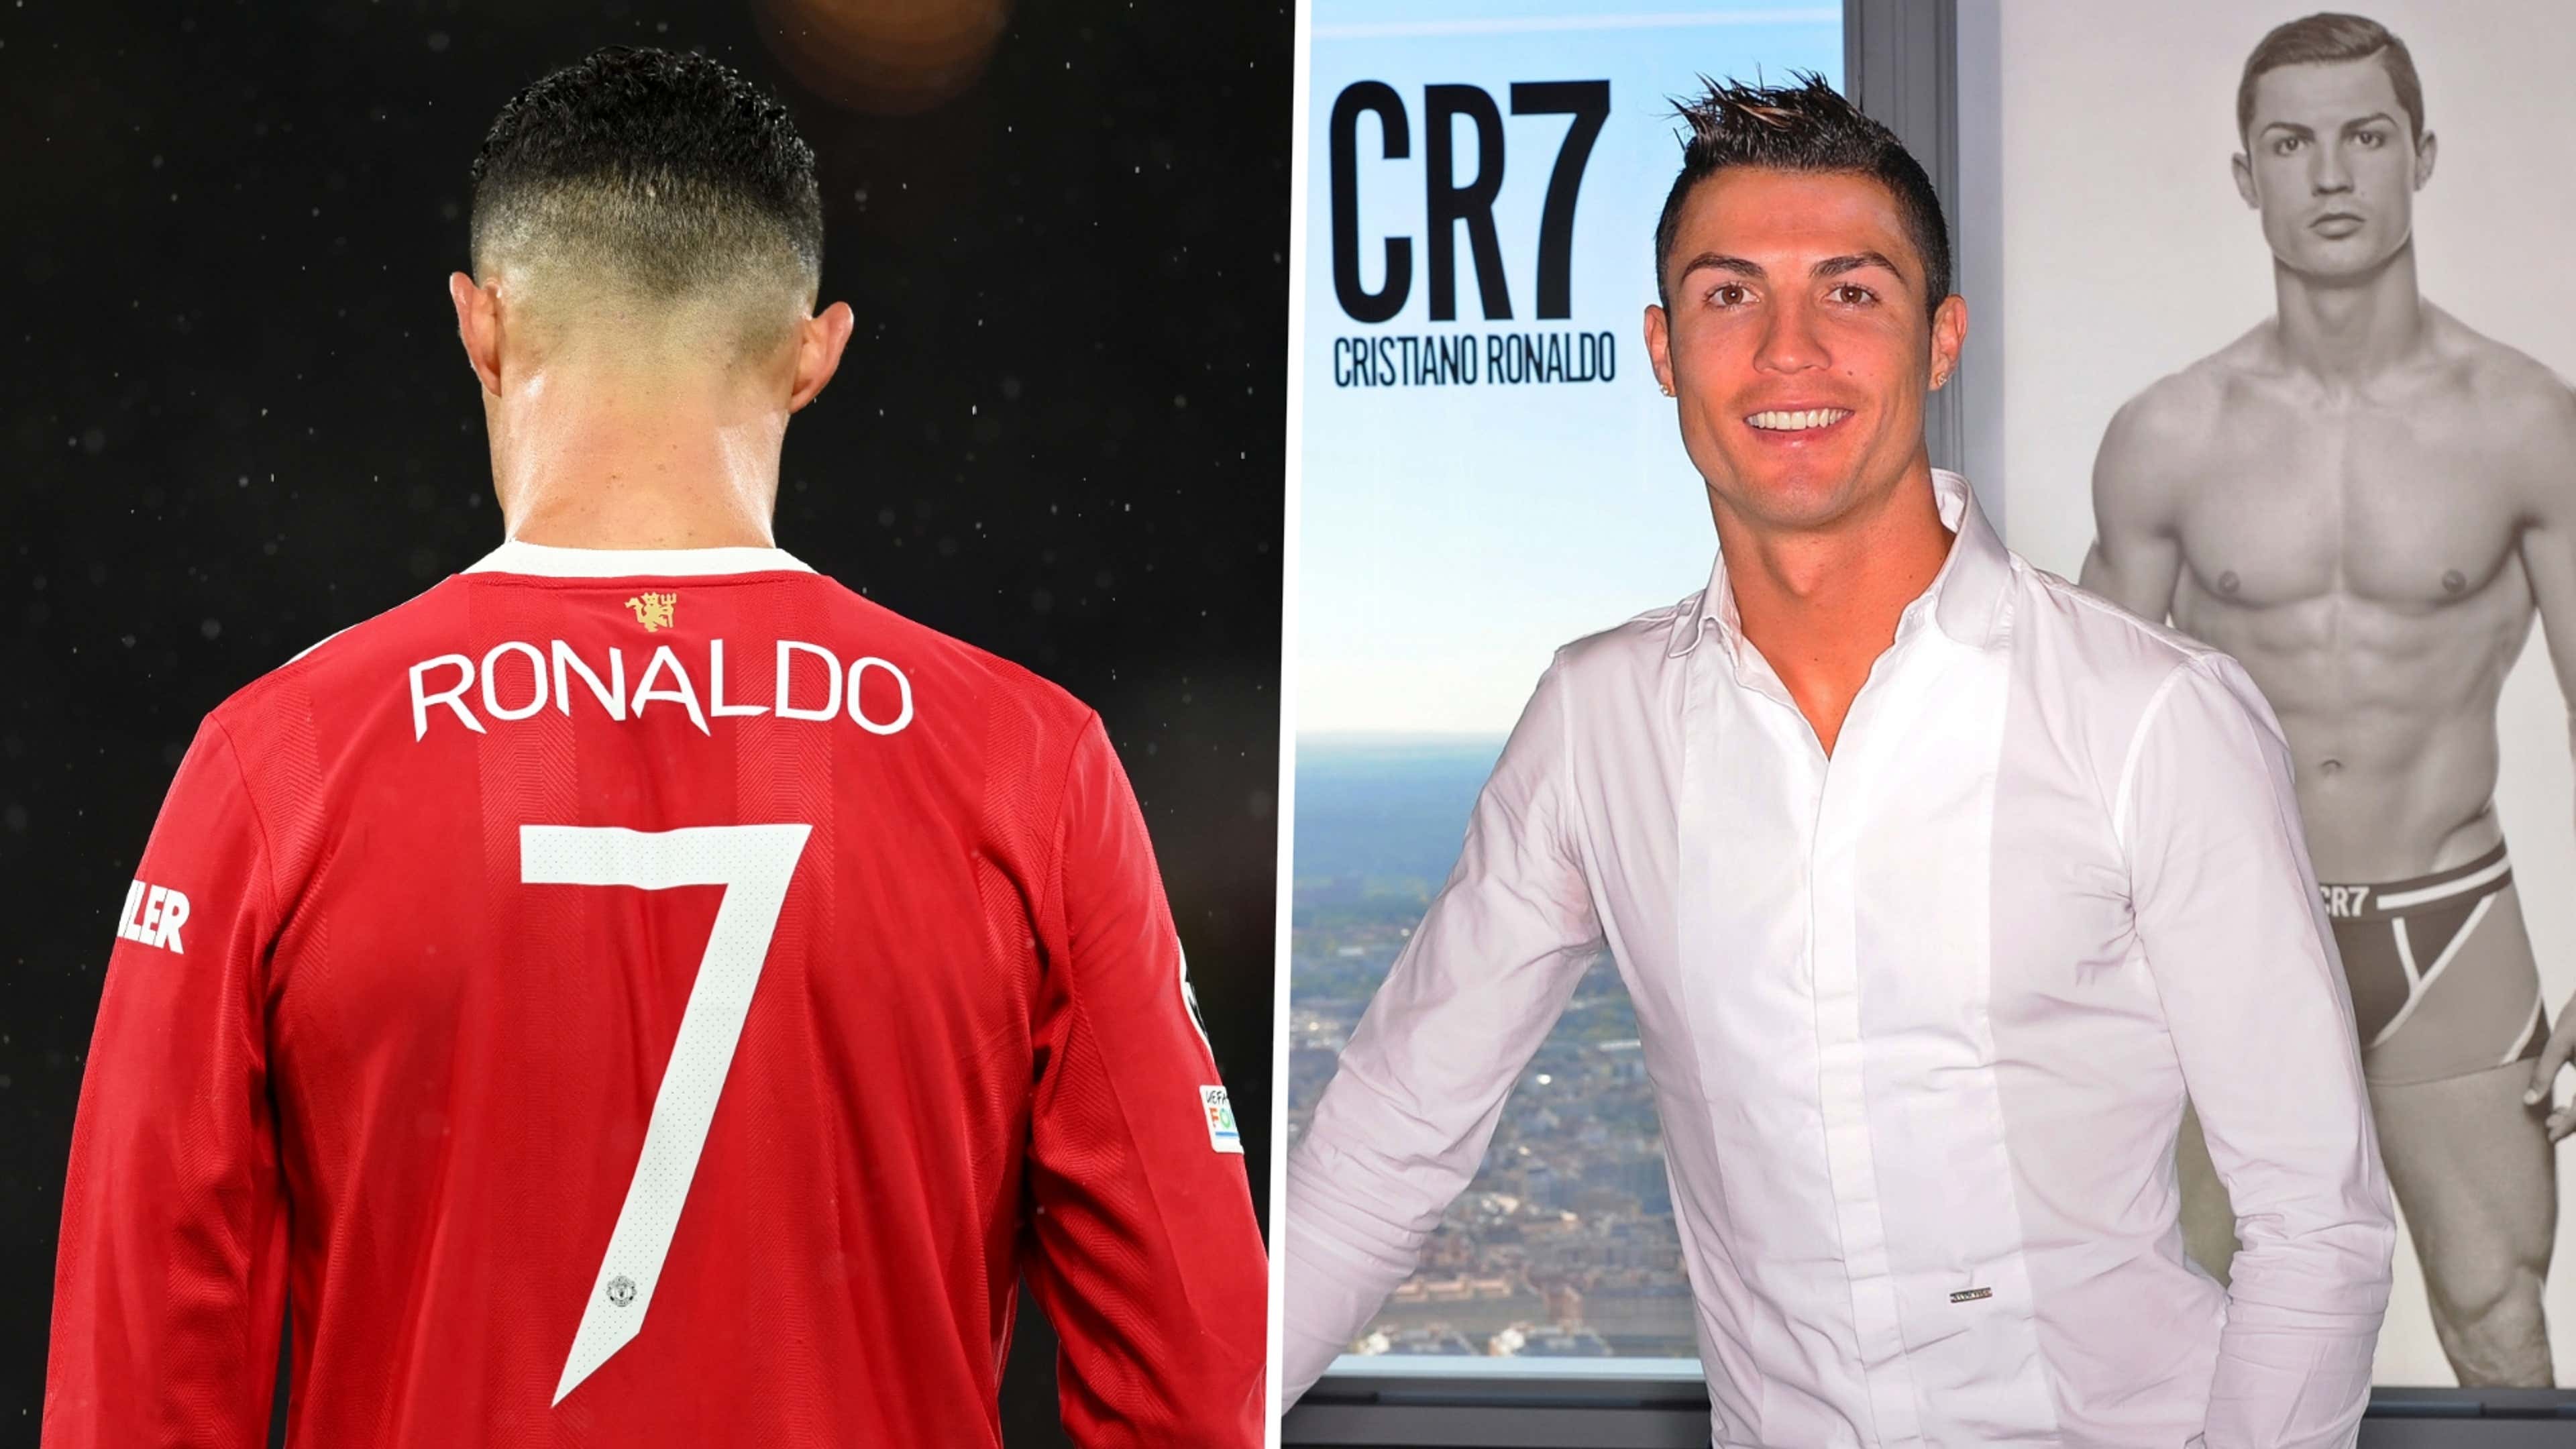 THE ICONIC NUMBER SEVEN: CRISTIANO RONALDO AND THE CR7 BRAND